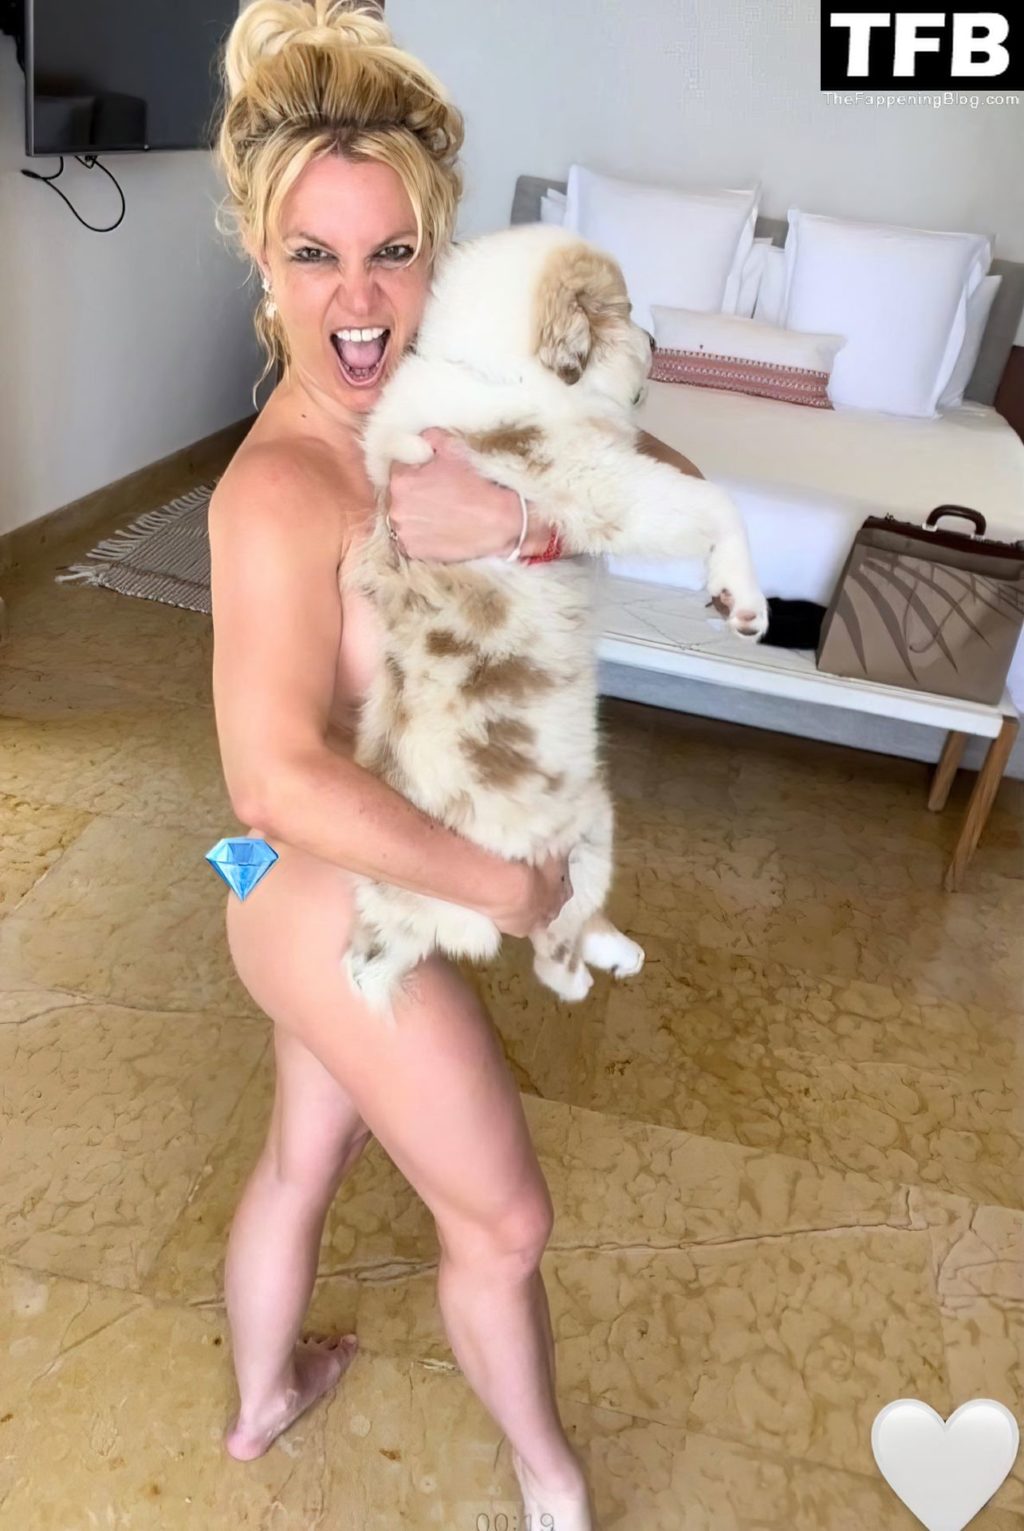 Britney Spears Nude 2 1 thefappeningblog.com  1024x1531 - Britney Spears Poses Naked With Her Pooch (6 Photos)